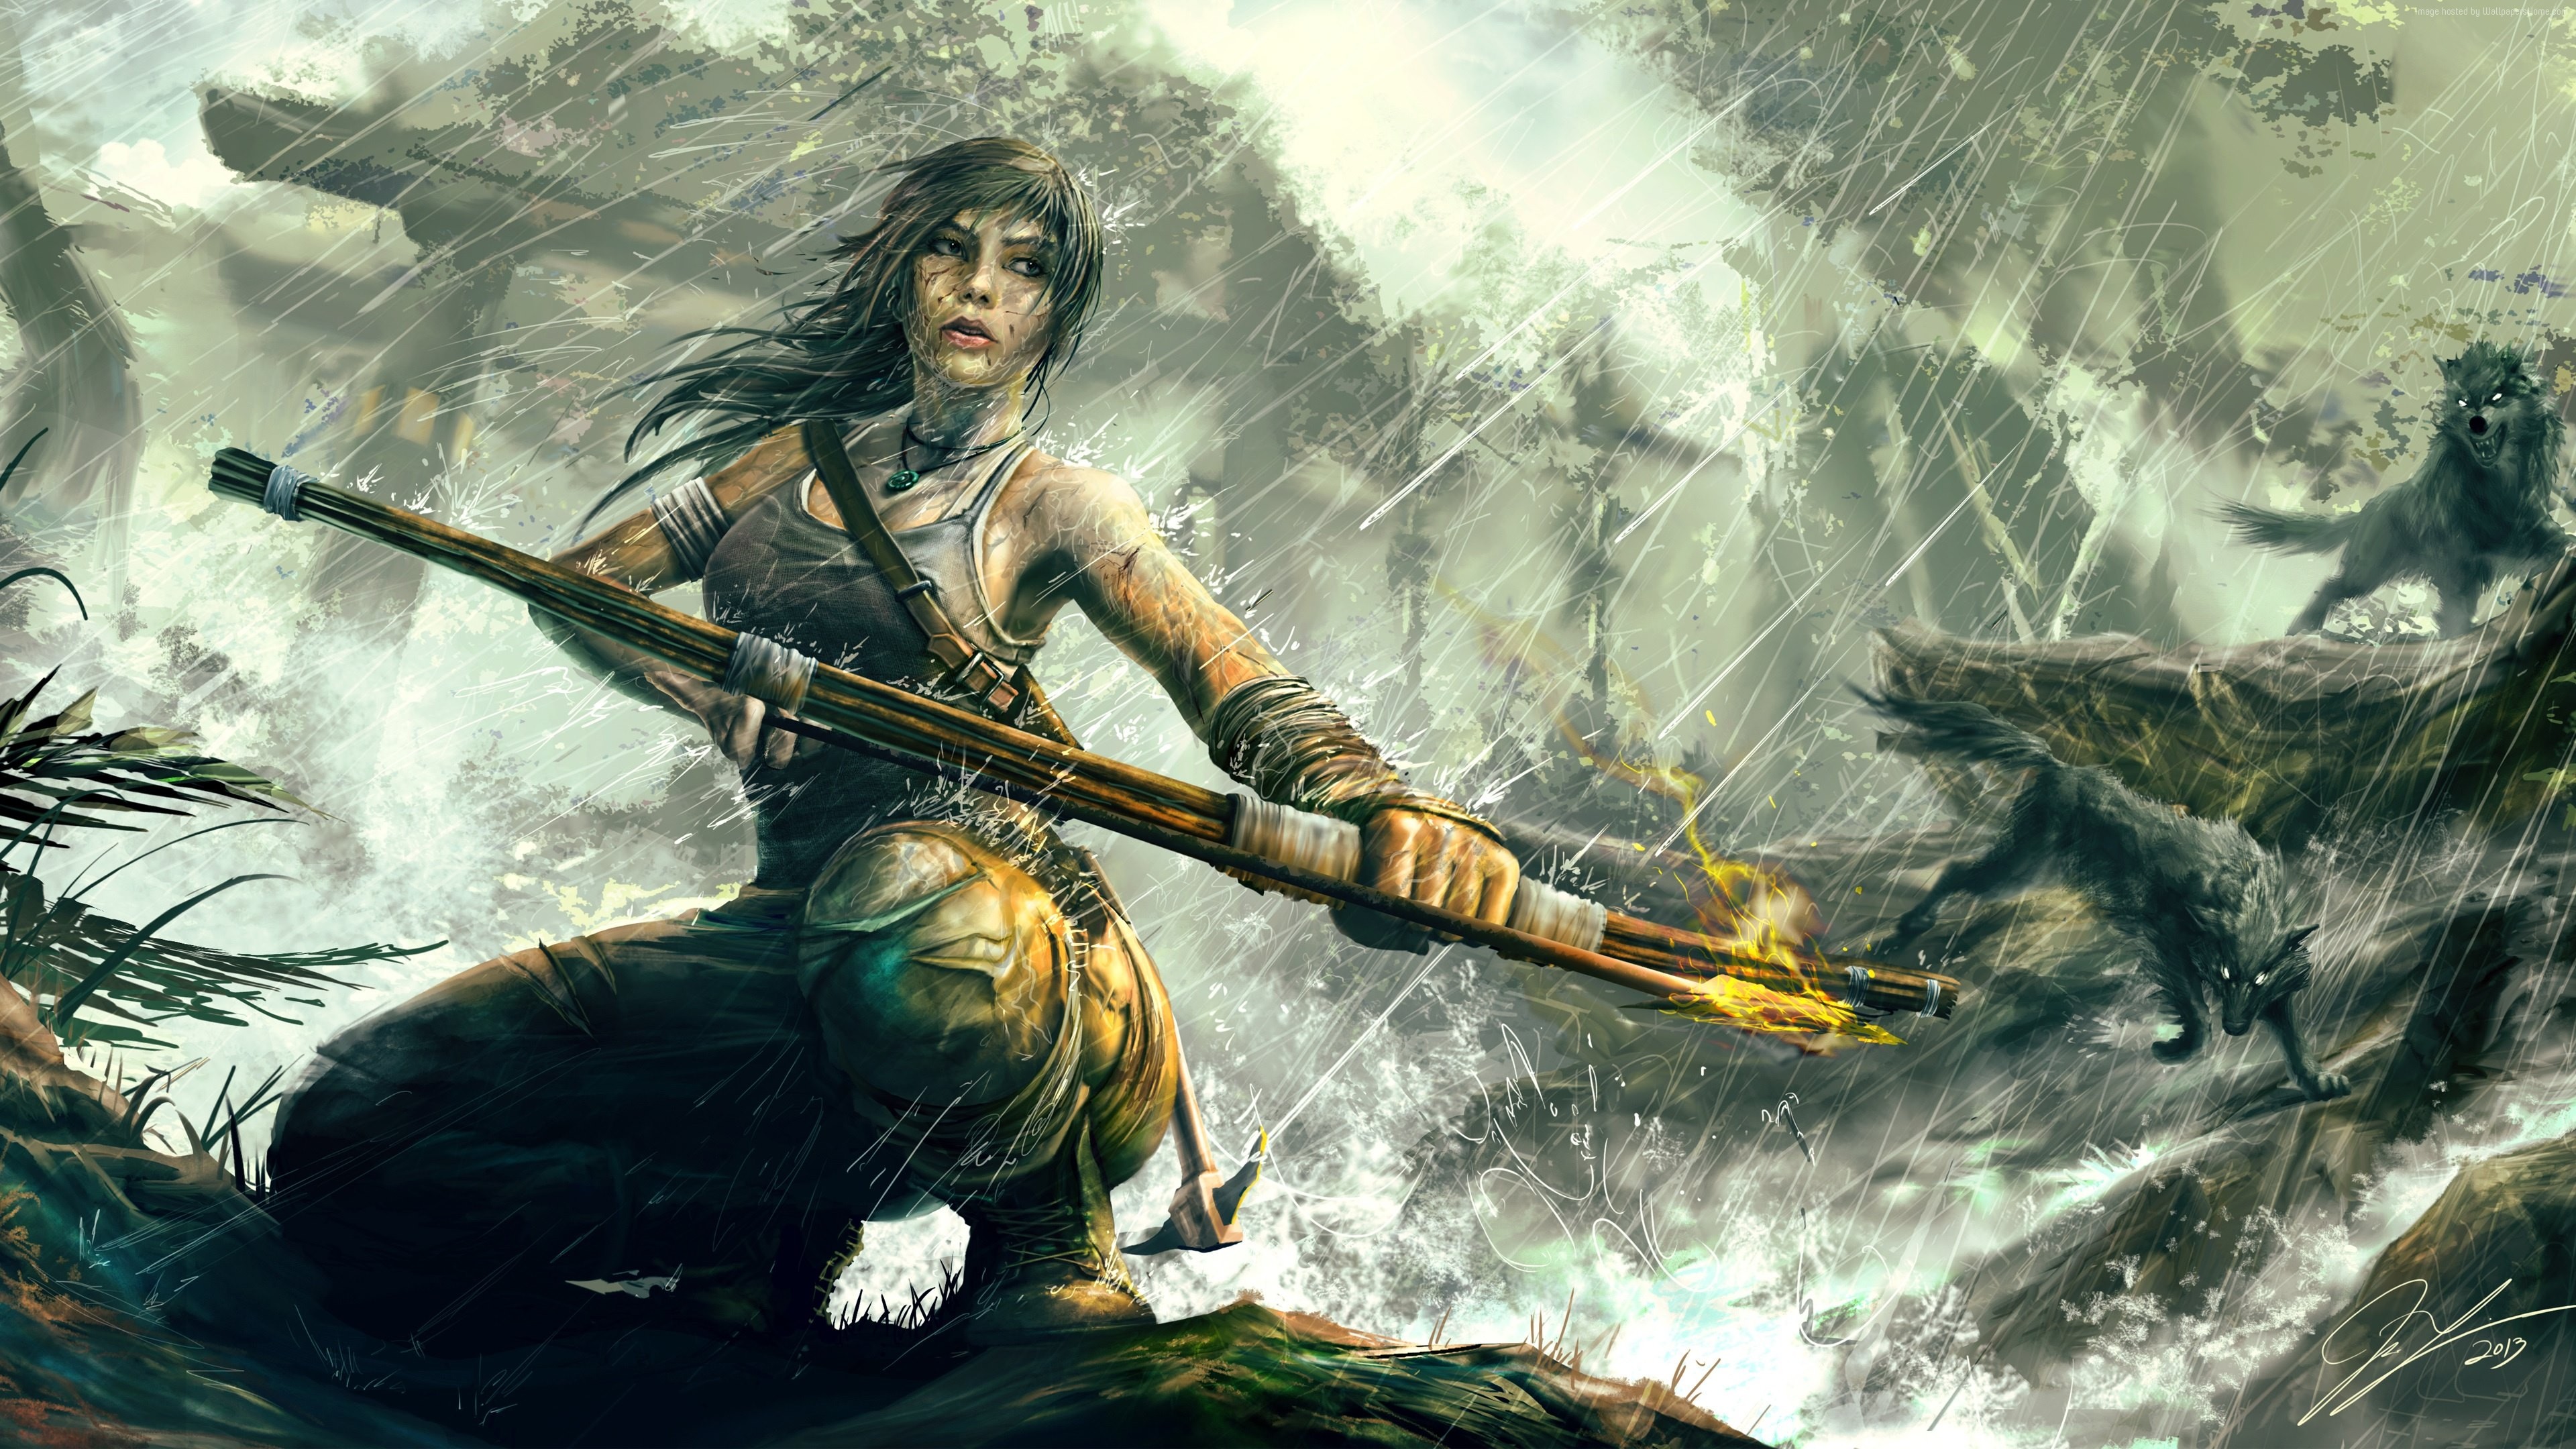 Tomb Raider Wallpaper Art Our Choice Rise of the Tomb Raider Tomb